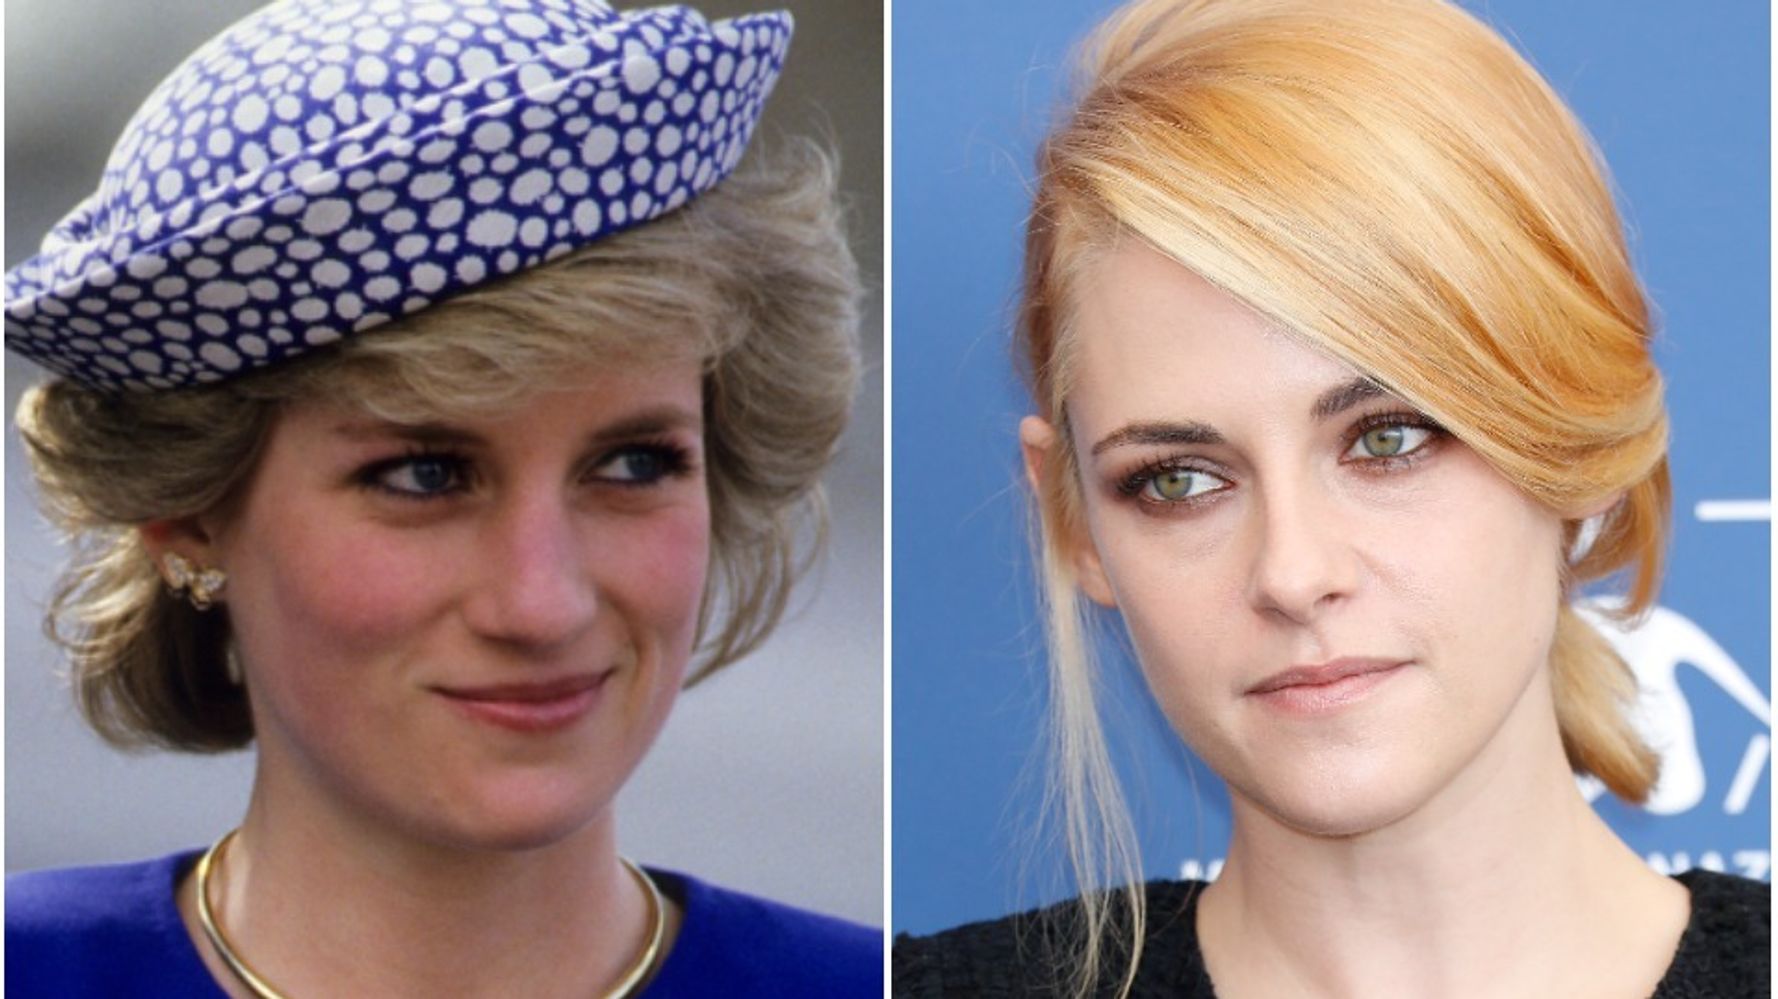 Kristen Stewart Felt Princess Diana Gave Her A 'Sign-Off' To Play Her In Biopic